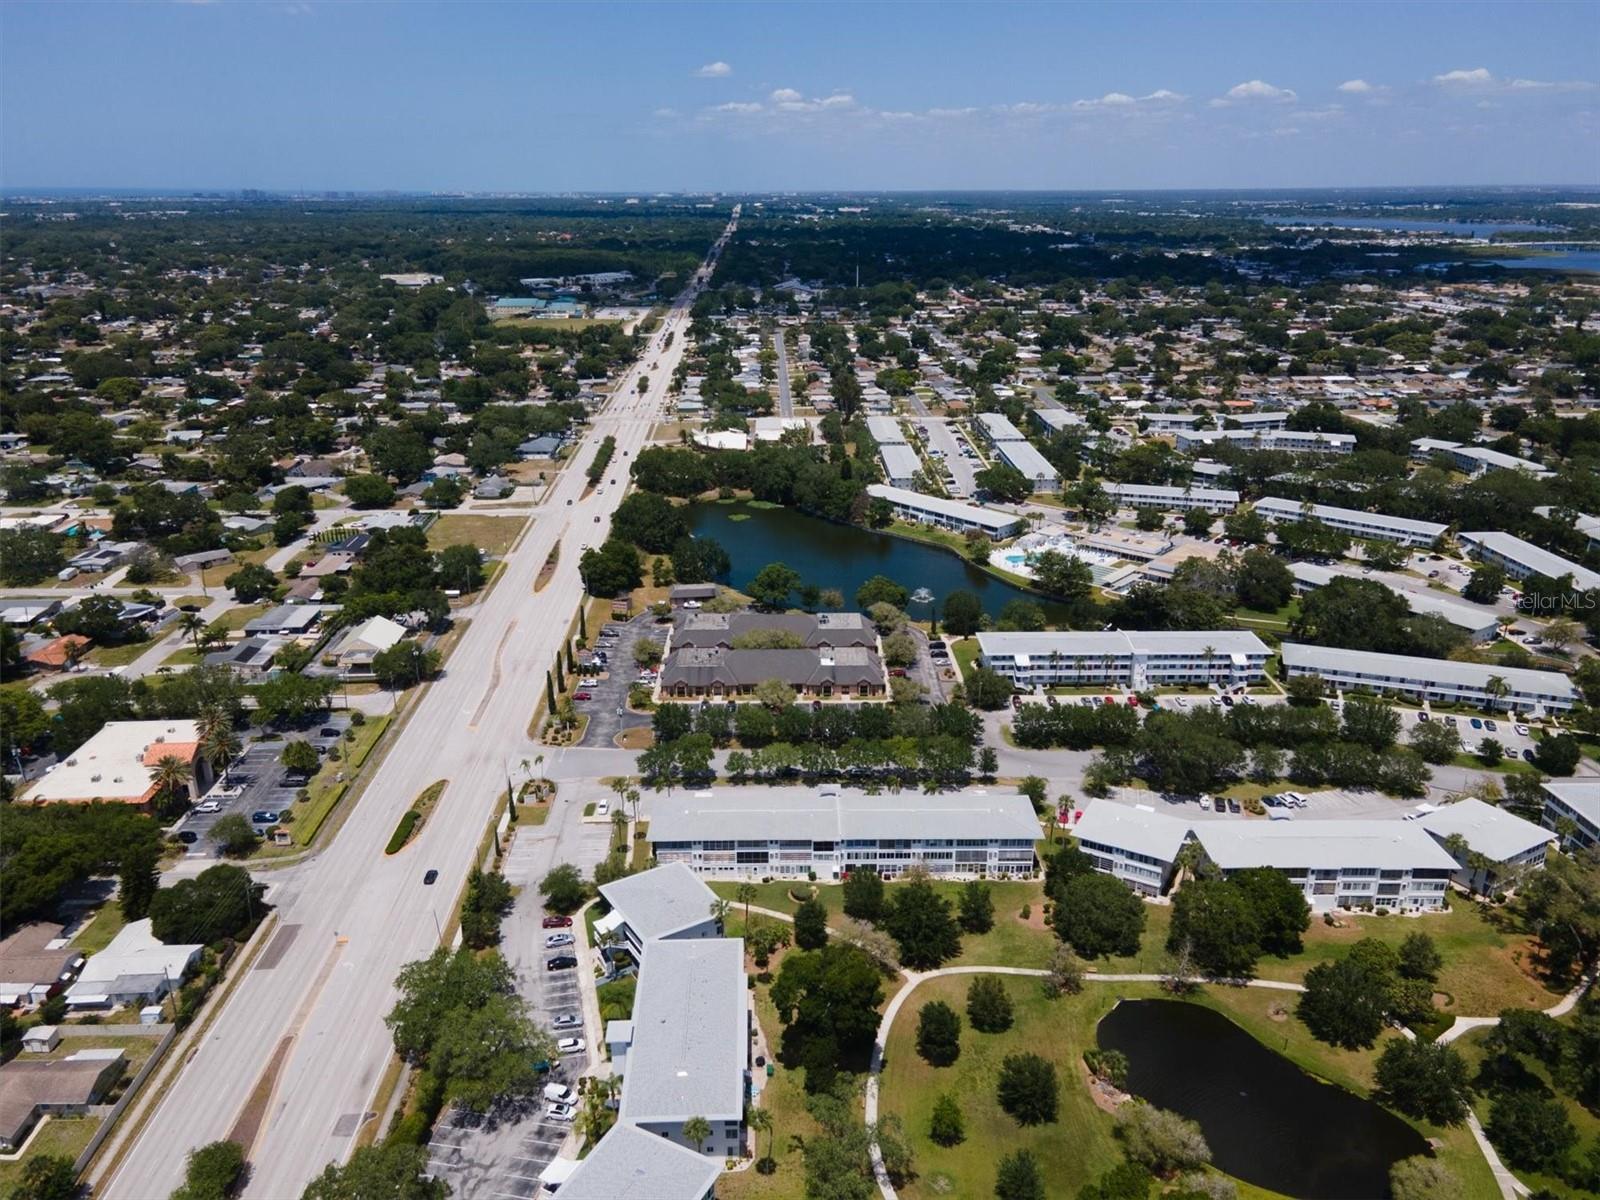 This view is looking to the north. More beaches off in the distance. Top right in the frame is the huge Seminole Lake, which is part of Lake Seminole Park (250 acres of green stuff and recreation. Pinellas County has about 20,000 acres through the county for the enjoyment of all of us.